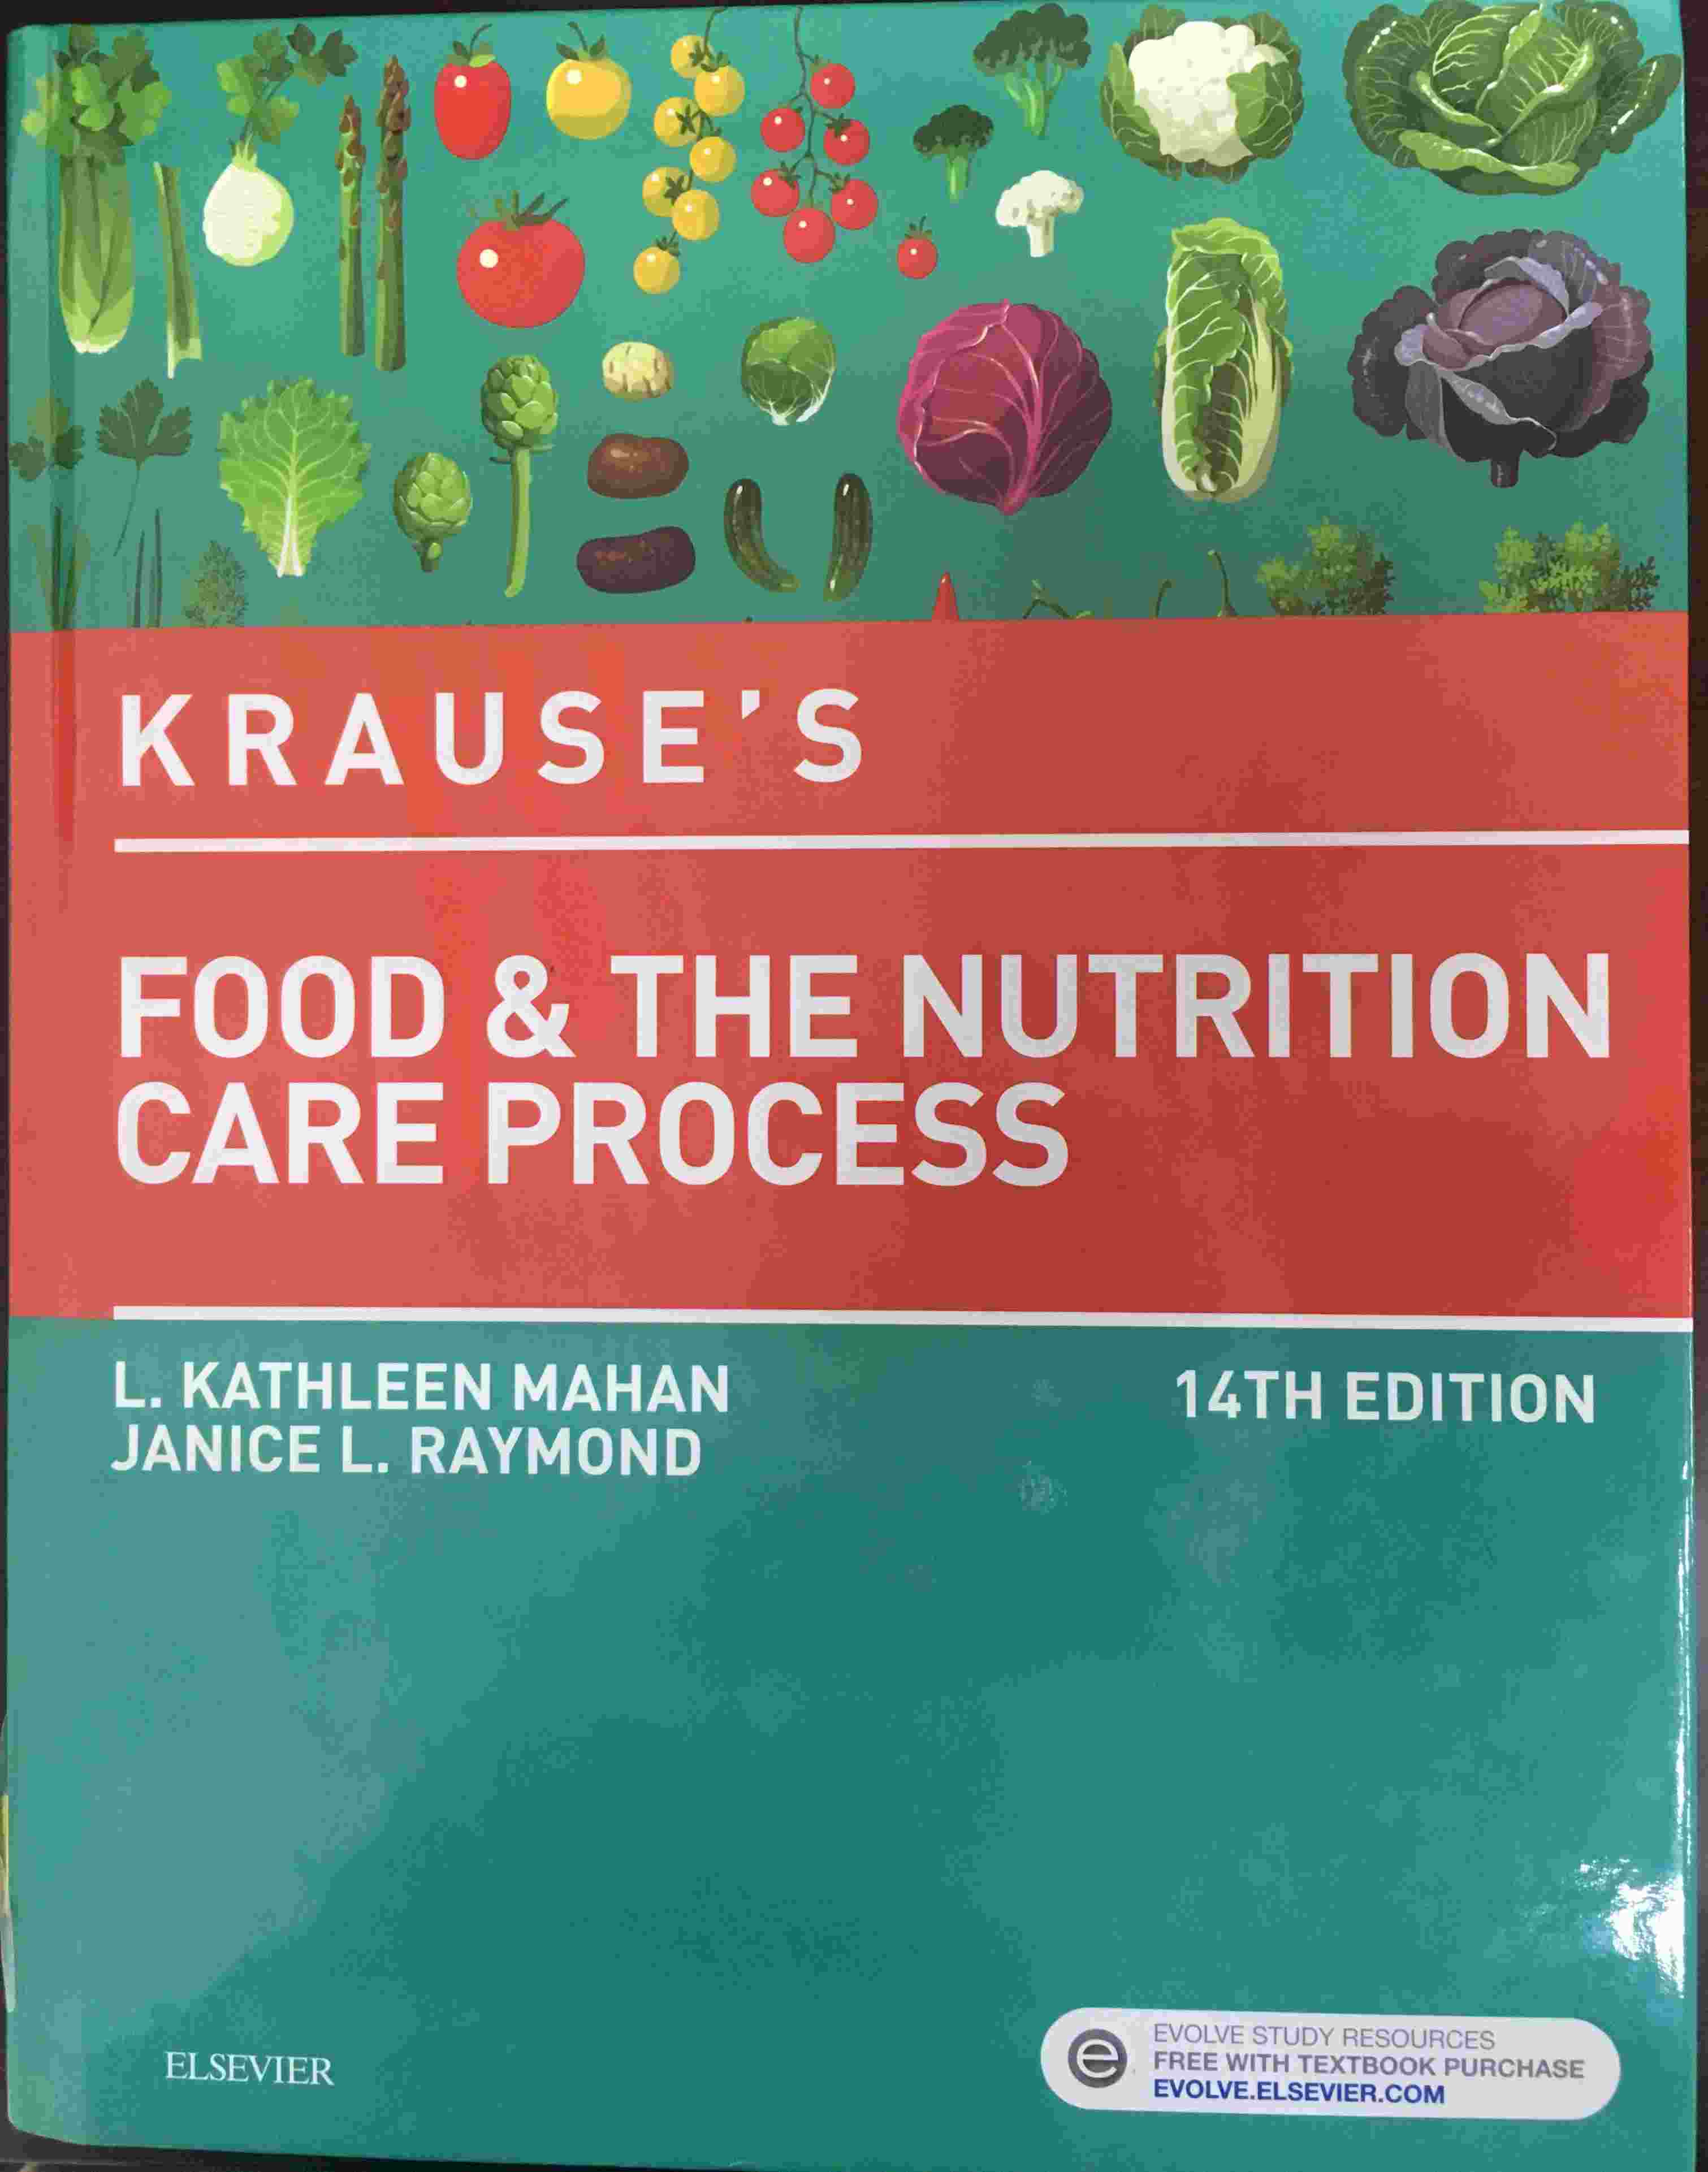 «Krause's Food & the Nutrition Care Process»